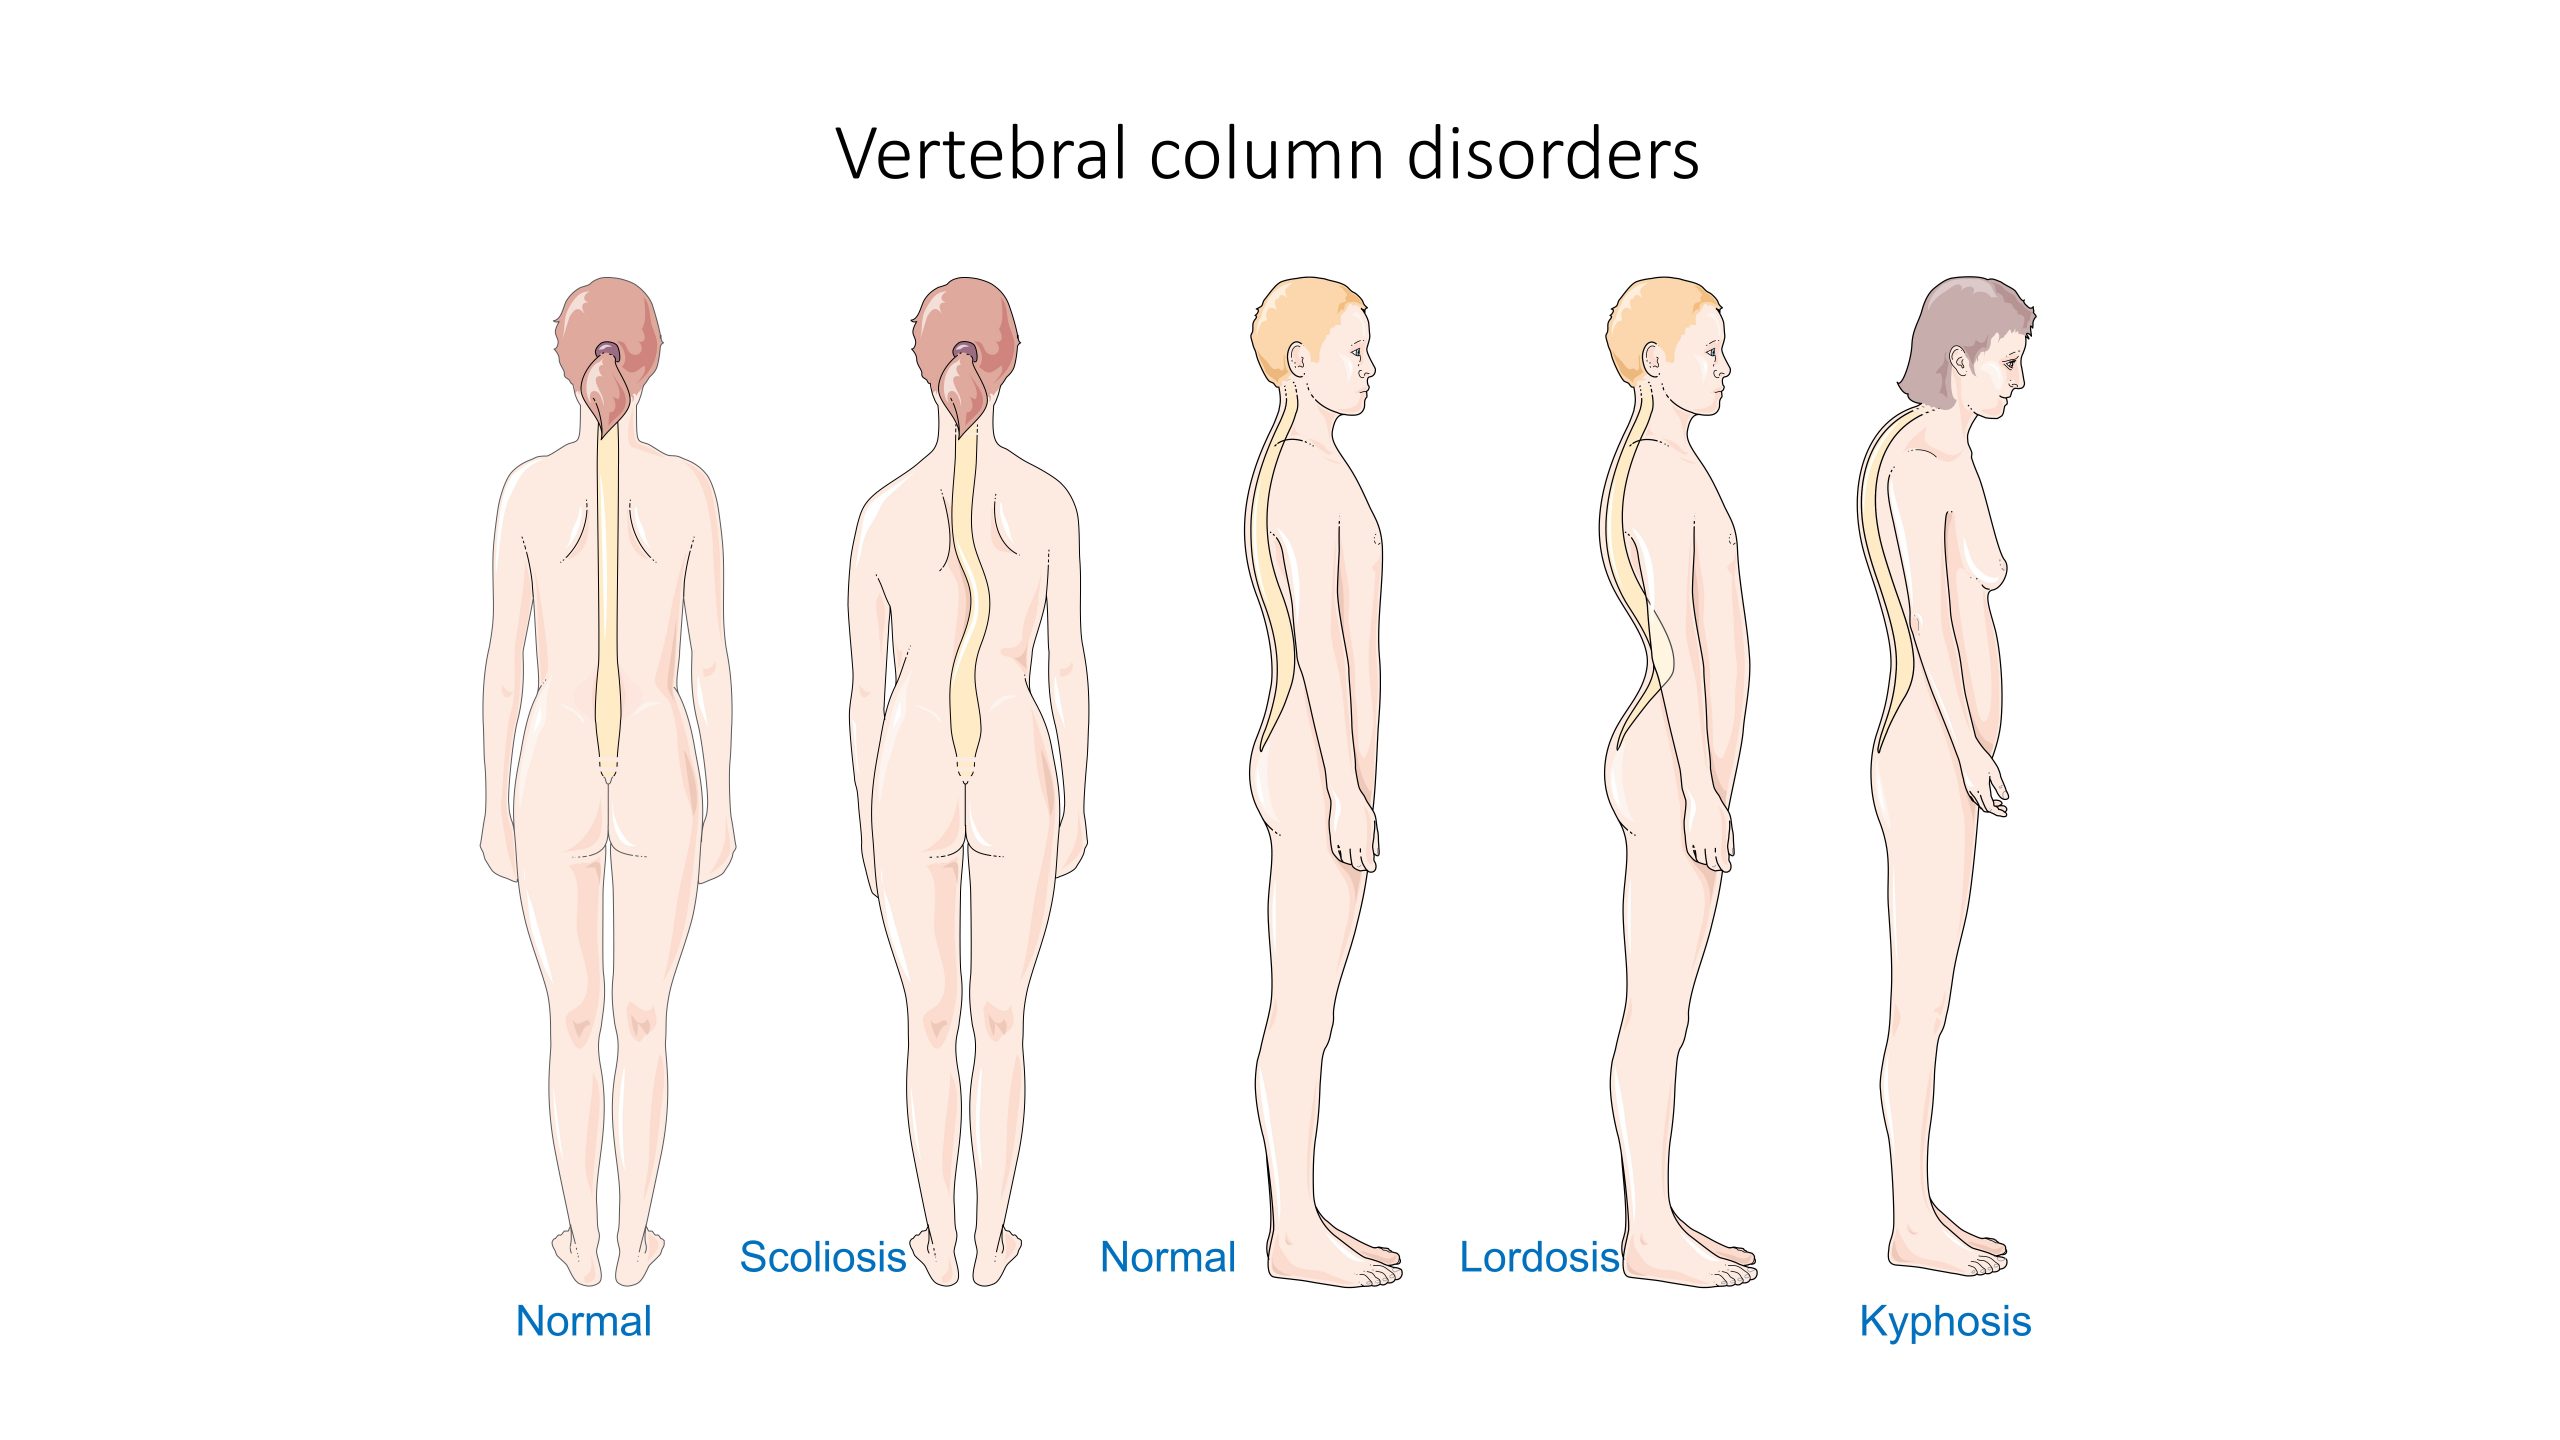 Illustration showing vertebral column disorders from rear and side views